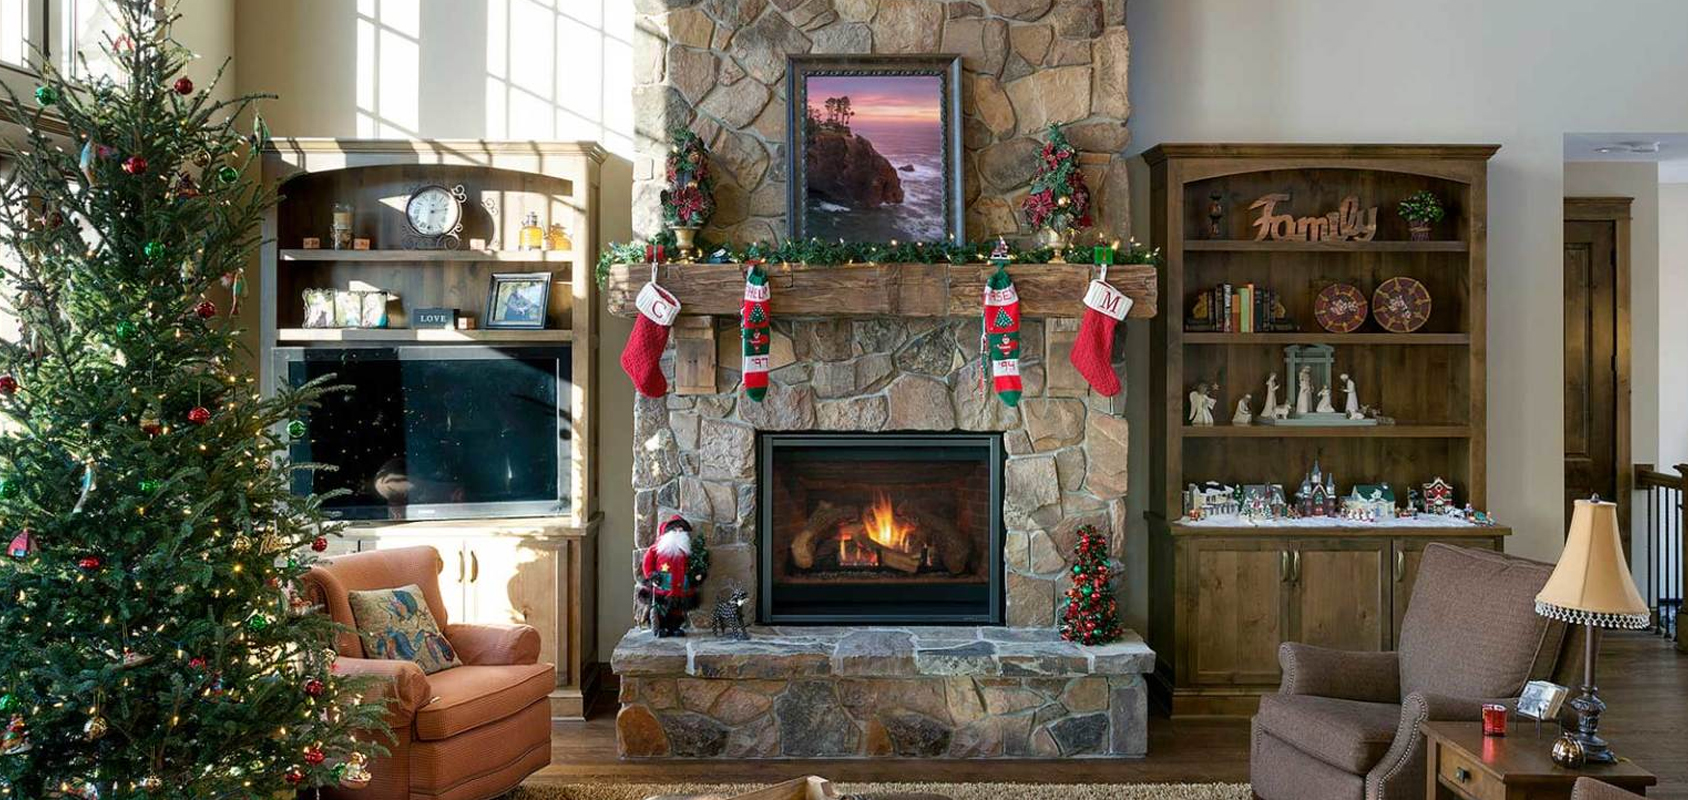 Fireplace with Christmas decorations